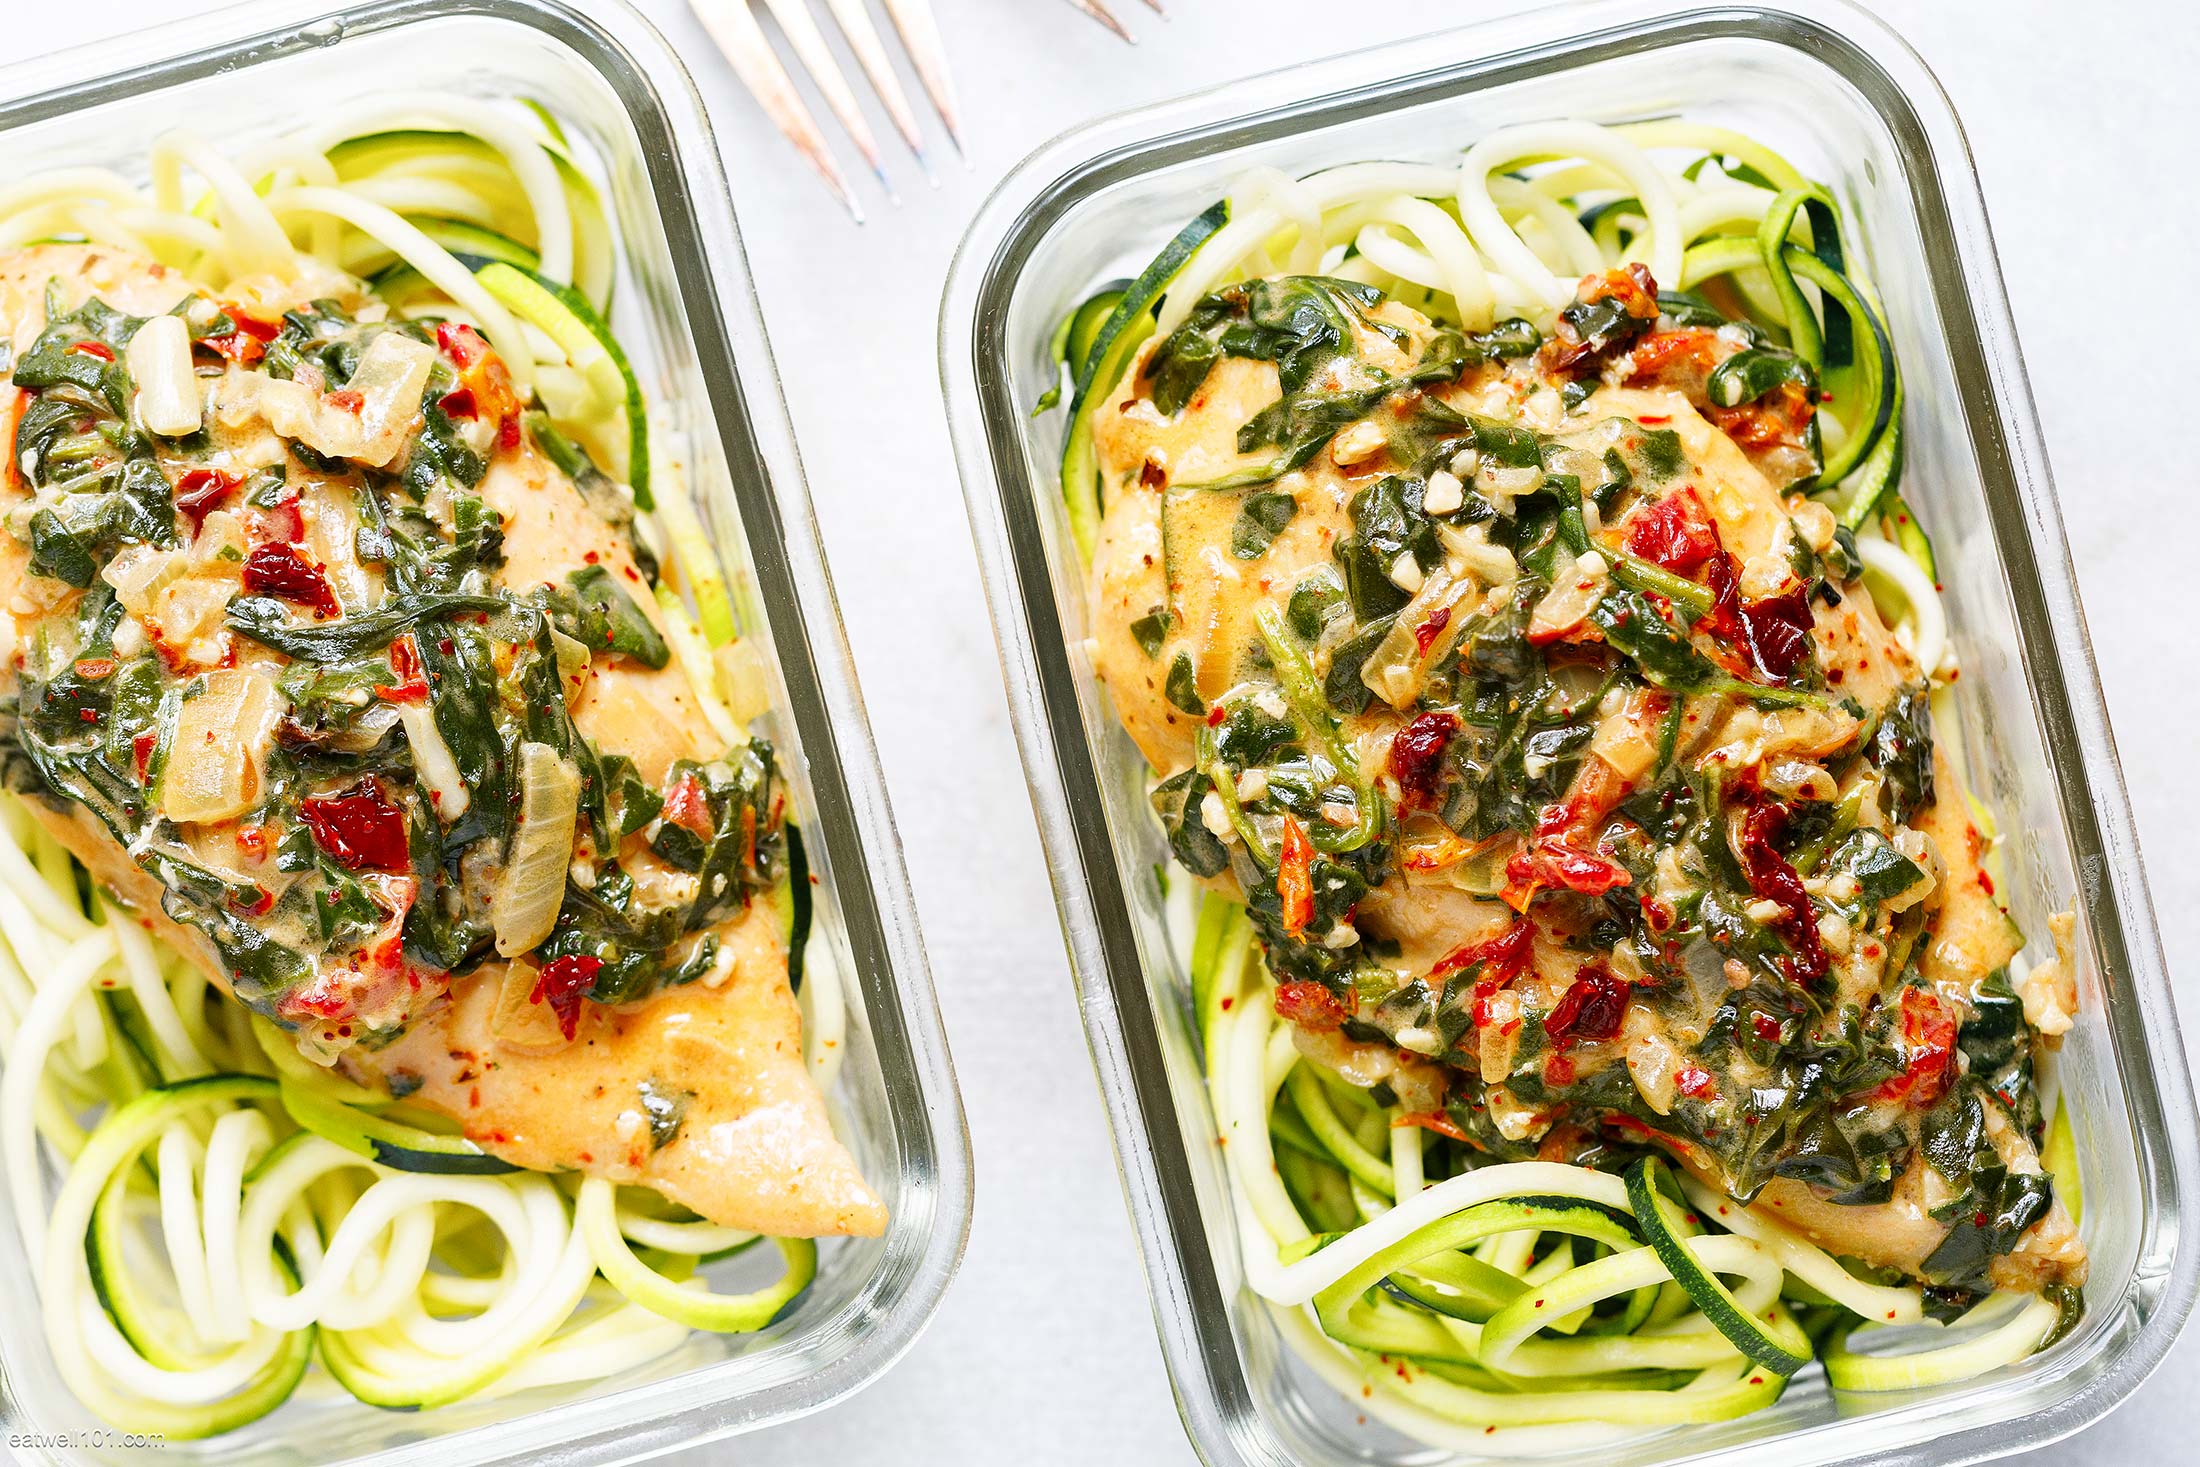 Creamy Spinach Chicken Meal Prep with Zucchini Noodles